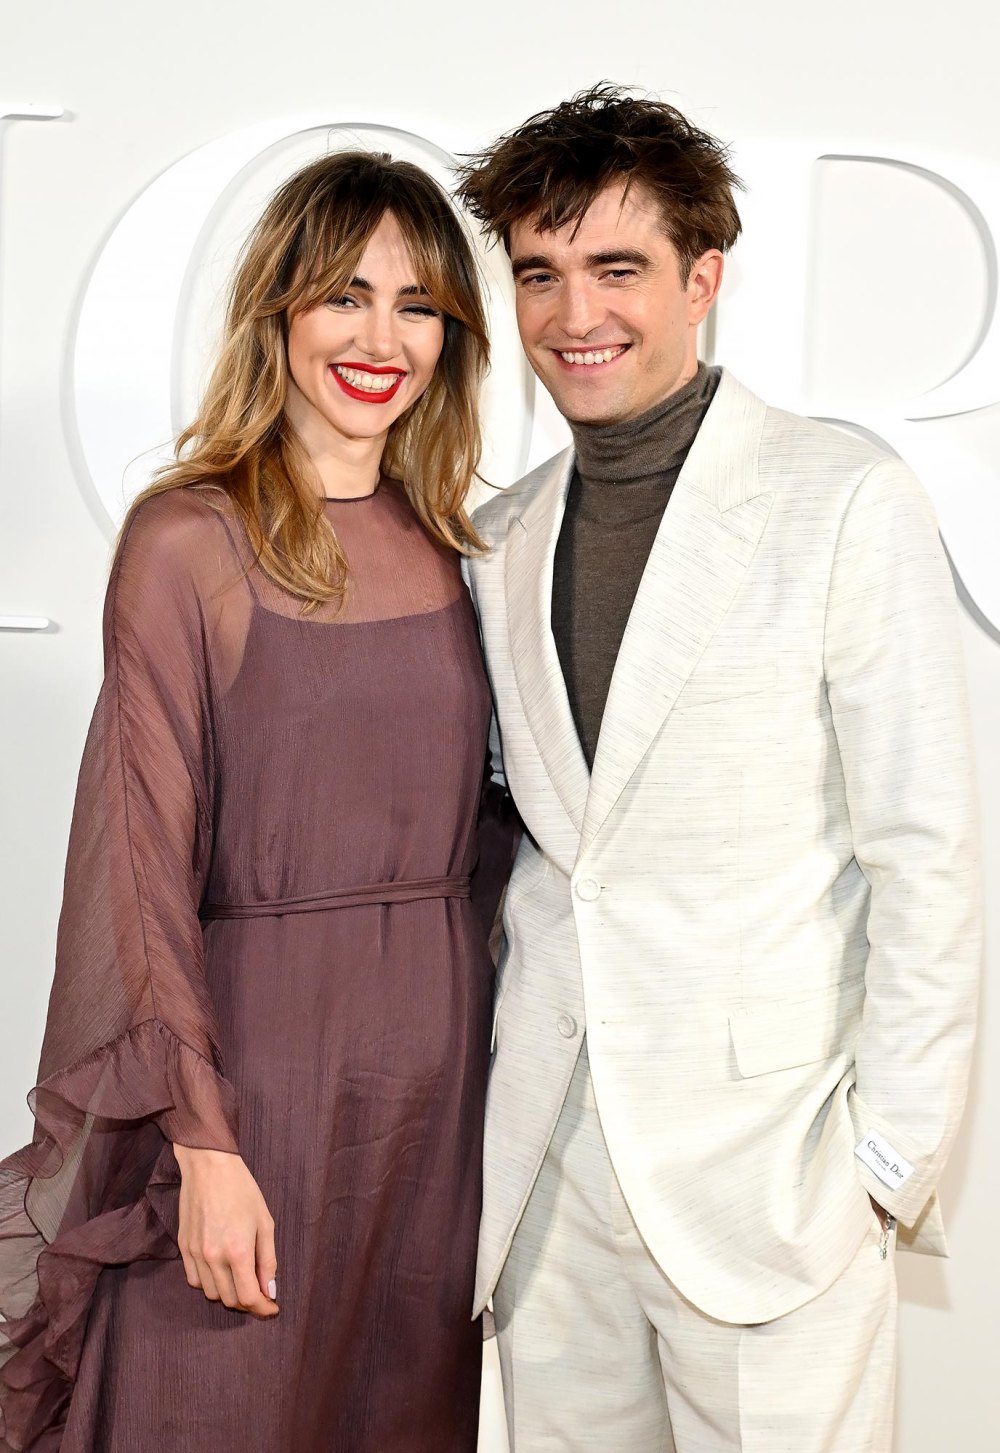 Suki Waterhouse Is Set to Play Coachella Shortly After Welcoming 1st Baby With Robert Pattinson